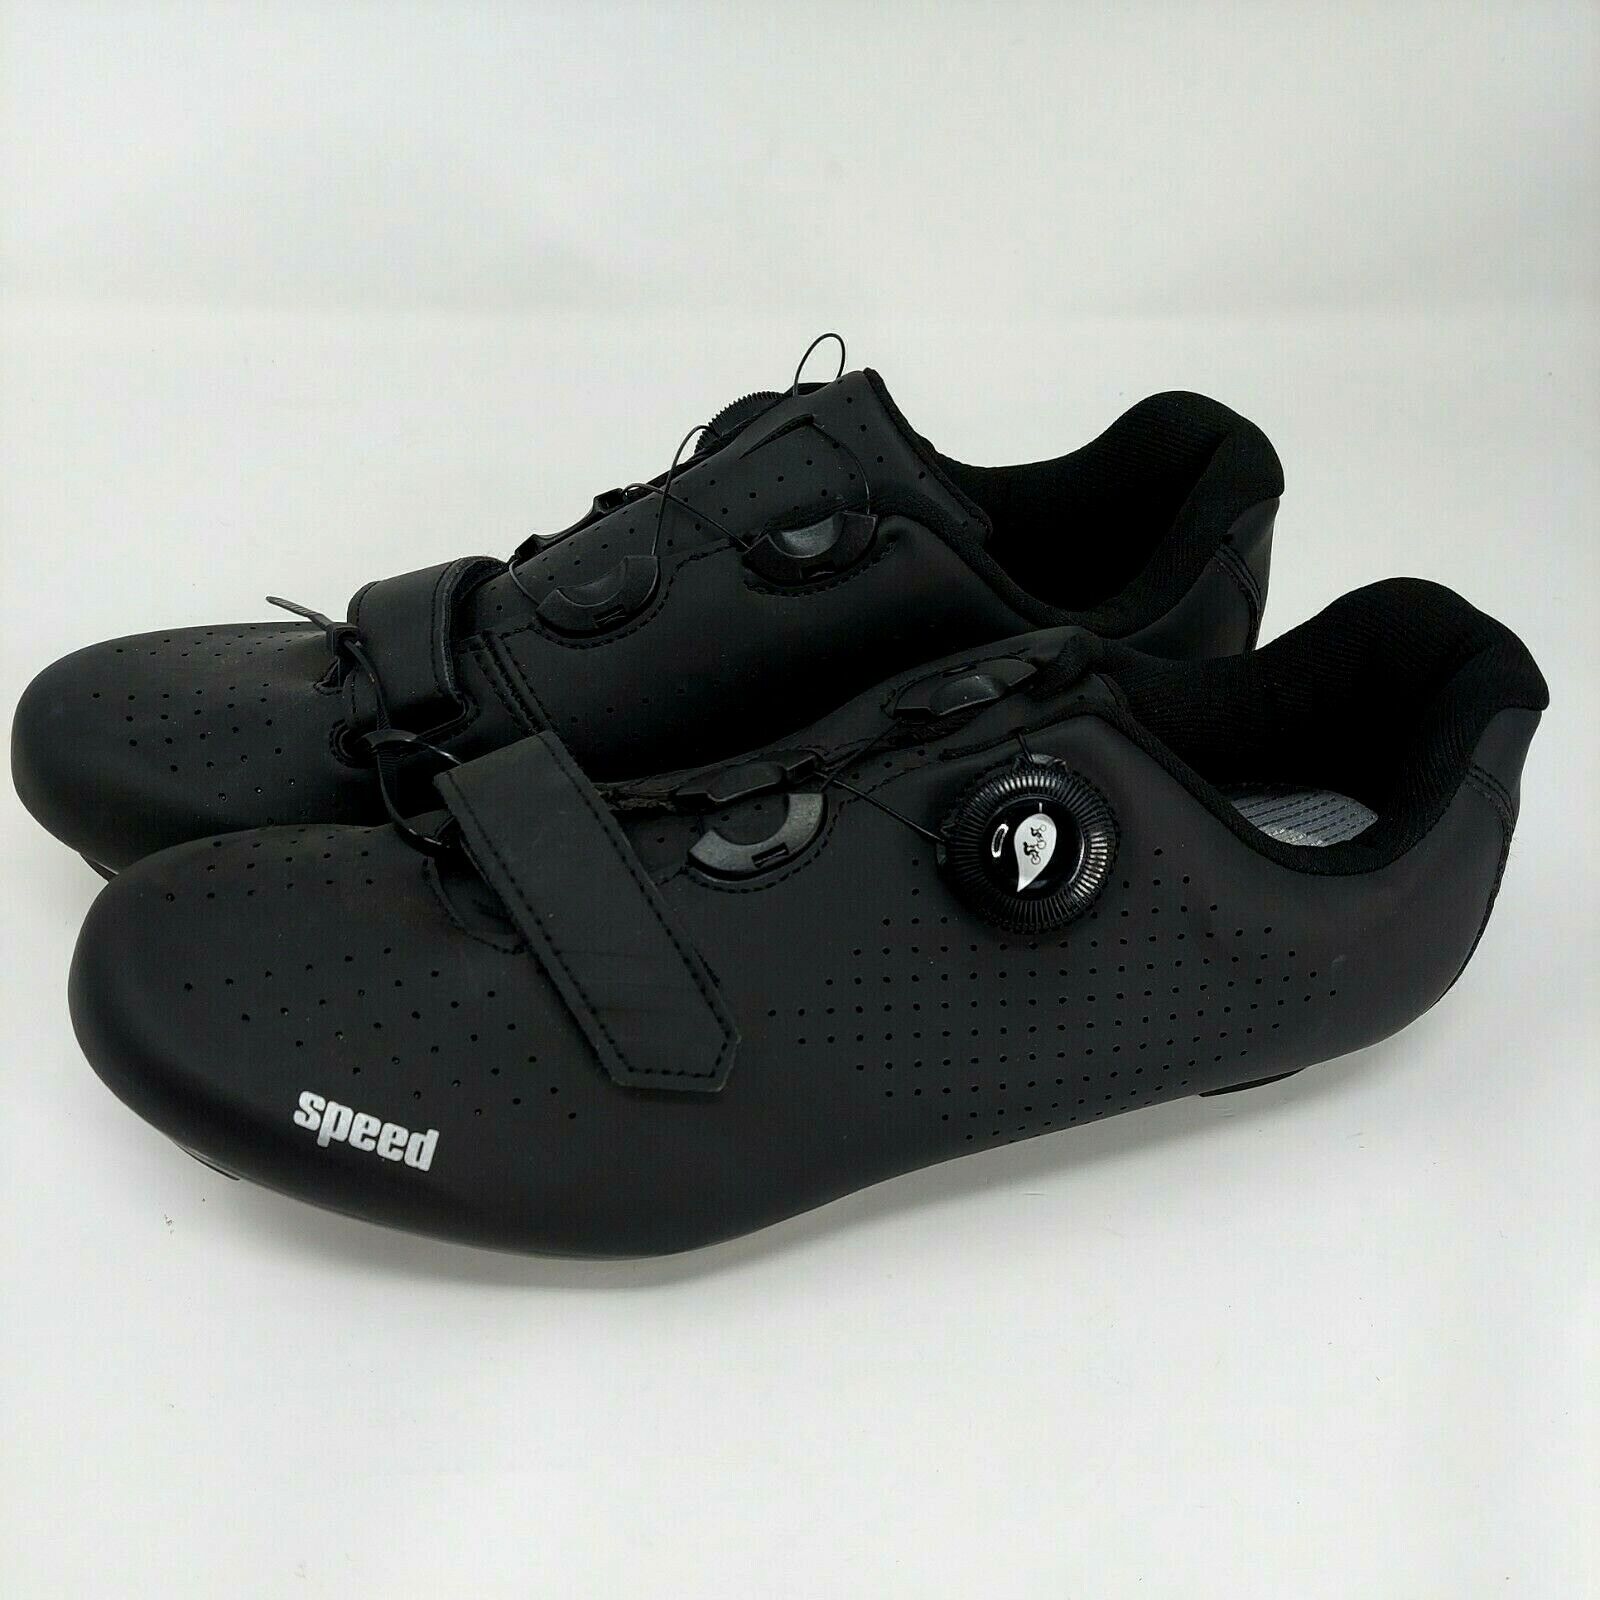 SPEED Cycling Shoes All stores are sold Cleats Bike BLACK NEW Max 45% OFF SZ US MEN 9